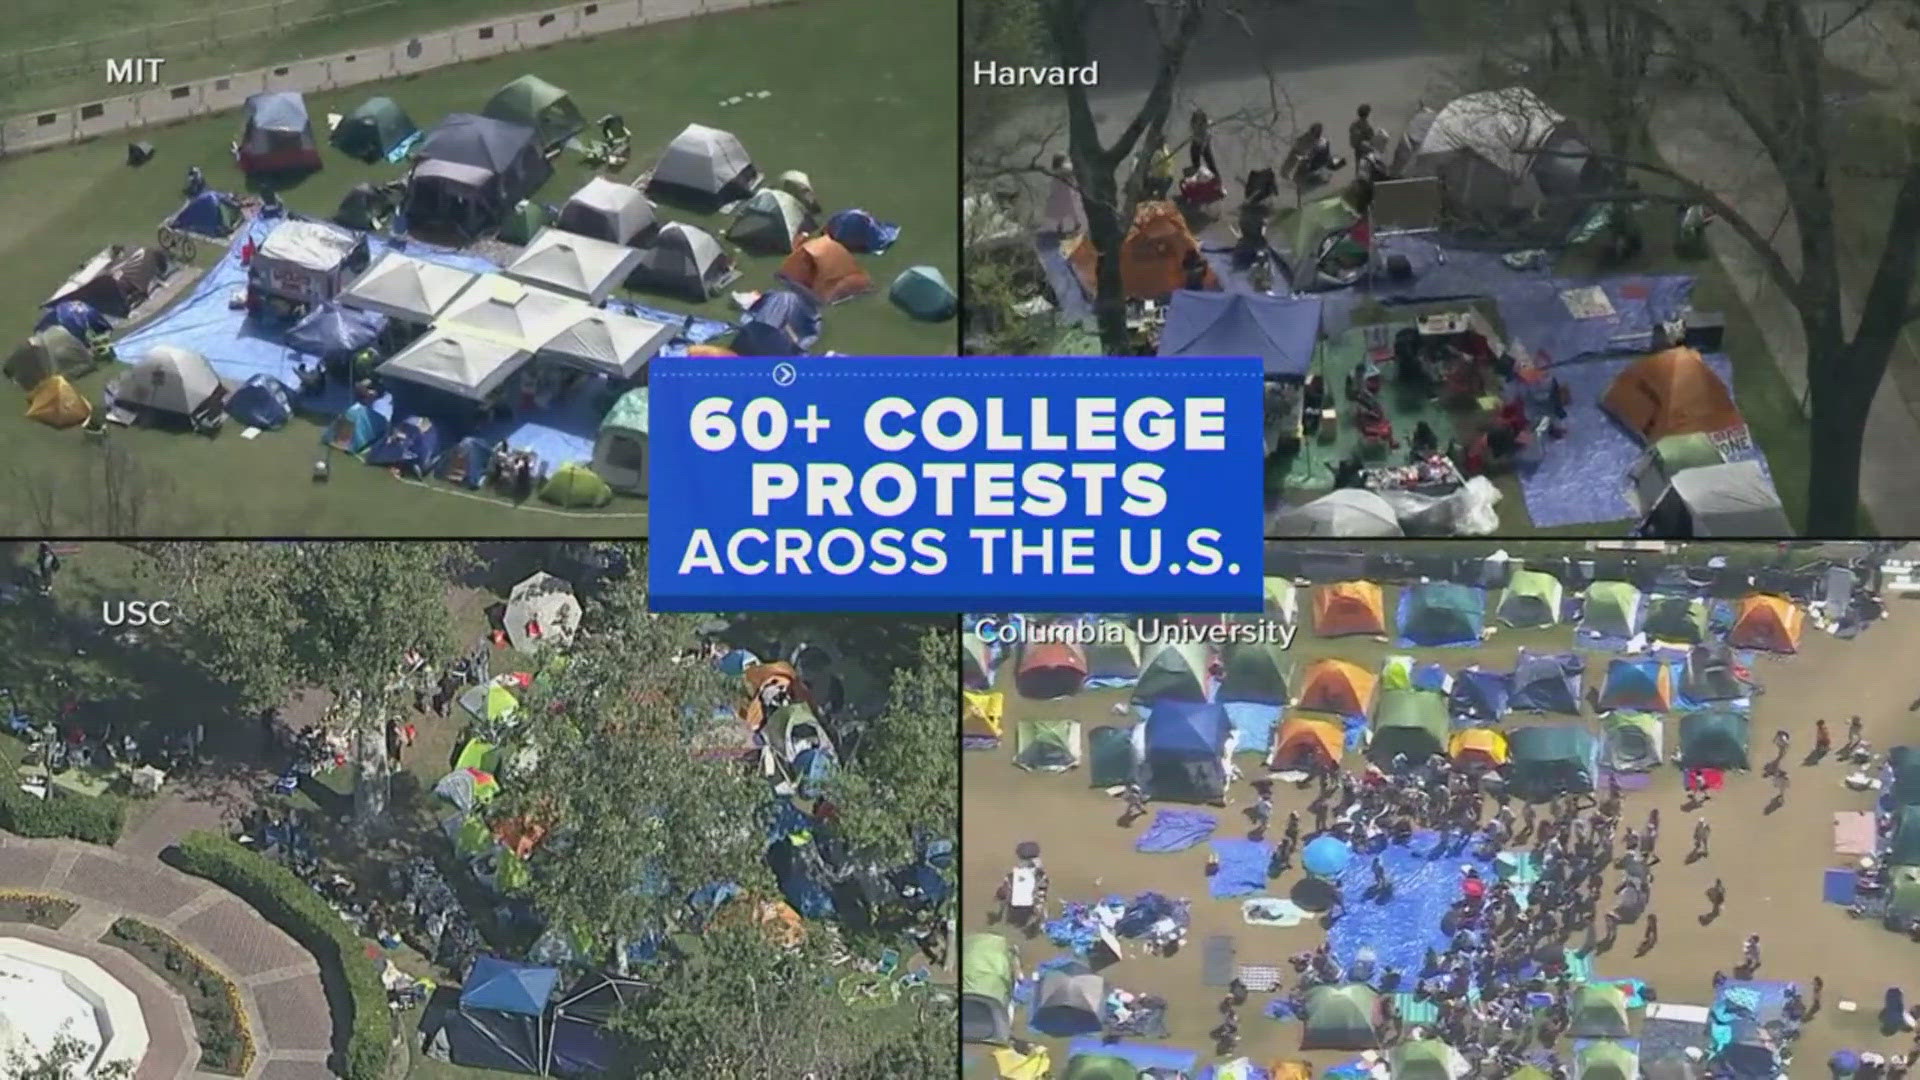 More than 60 protests have happened at college campuses across the country.